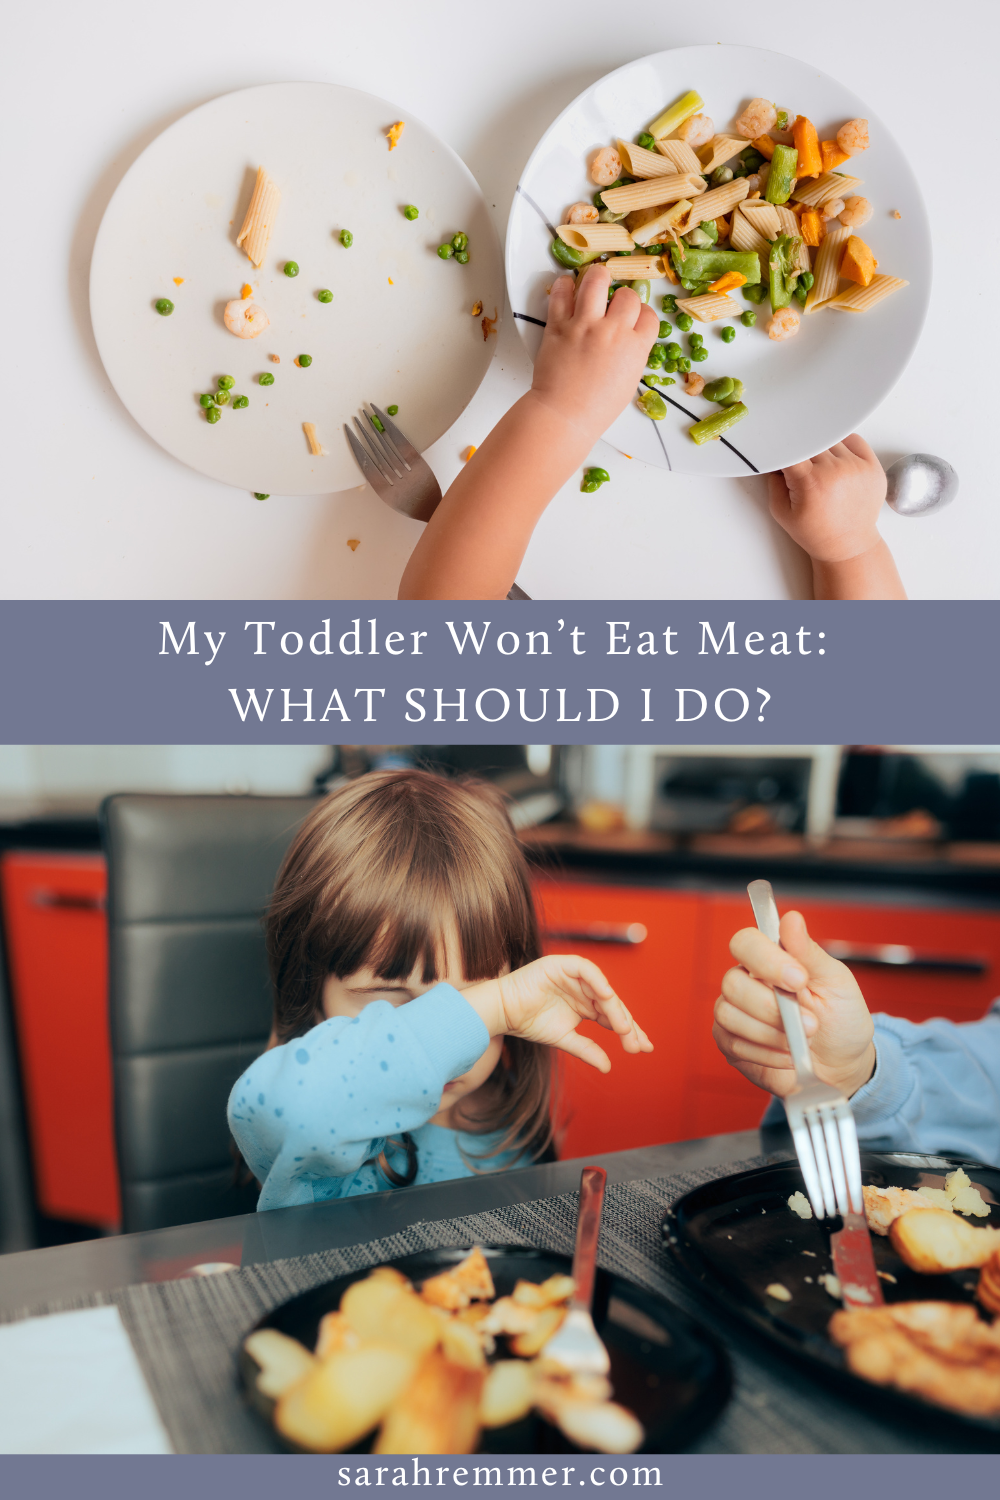 Help! My toddler won’t eat meat! As a registered dietitian, I help you figure out what to do when your child refuses to eat meat.